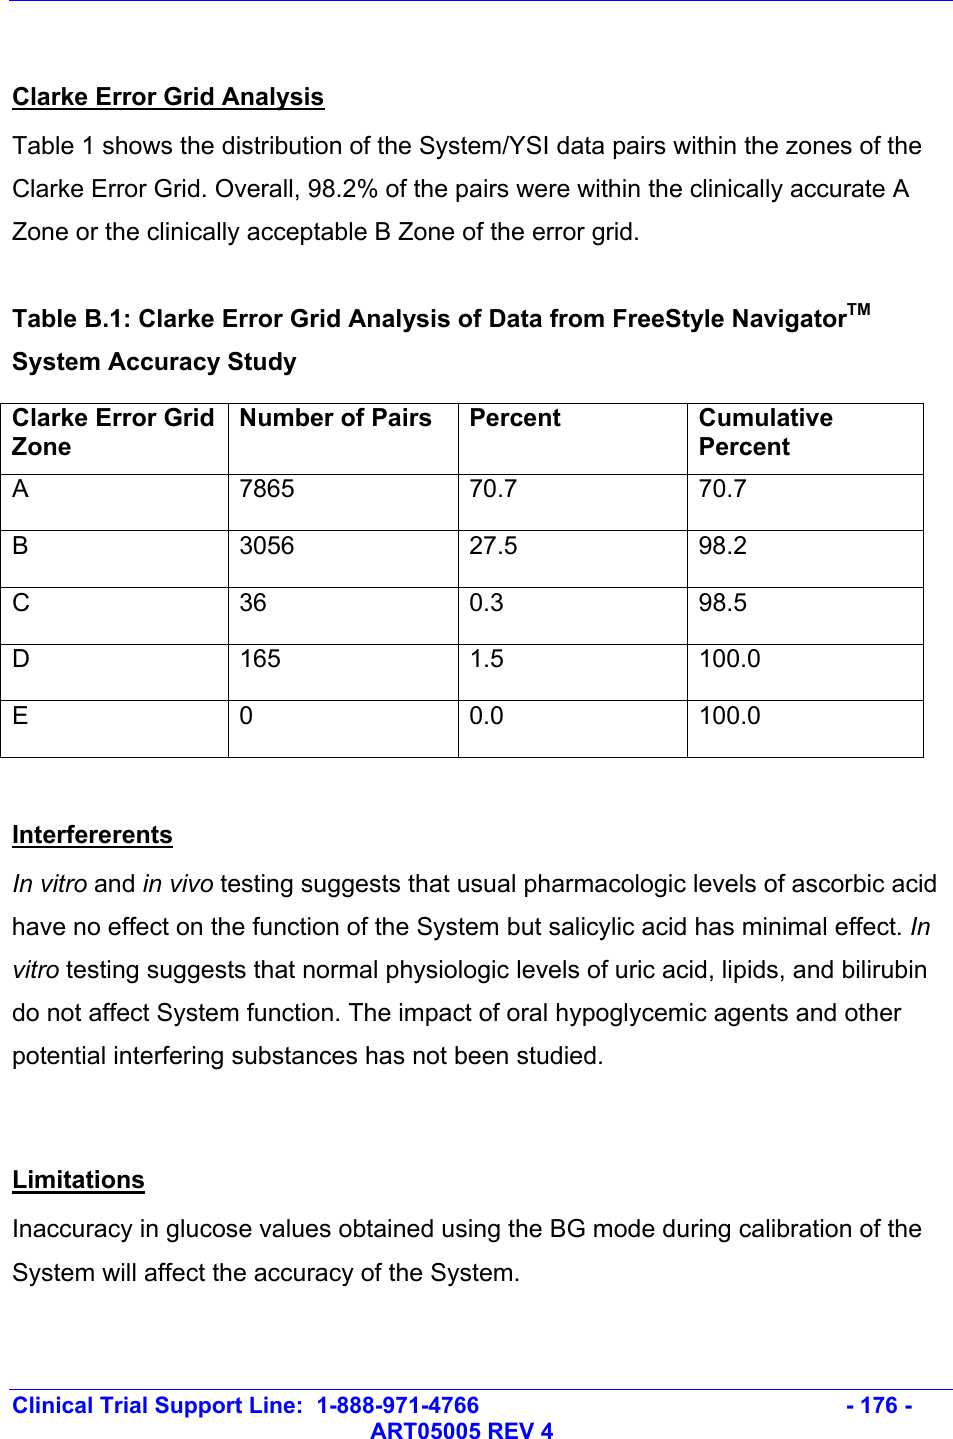   Clinical Trial Support Line:  1-888-971-4766   - 176 -   ART05005 REV 4  Clarke Error Grid Analysis  Table 1 shows the distribution of the System/YSI data pairs within the zones of the Clarke Error Grid. Overall, 98.2% of the pairs were within the clinically accurate A Zone or the clinically acceptable B Zone of the error grid.  Table B.1: Clarke Error Grid Analysis of Data from FreeStyle NavigatorTM System Accuracy Study  Clarke Error Grid Zone Number of Pairs  Percent  Cumulative Percent A 7865 70.7 70.7 B 3056 27.5 98.2 C 36 0.3 98.5 D 165 1.5 100.0 E 0  0.0 100.0  Interfererents In vitro and in vivo testing suggests that usual pharmacologic levels of ascorbic acid have no effect on the function of the System but salicylic acid has minimal effect. In vitro testing suggests that normal physiologic levels of uric acid, lipids, and bilirubin do not affect System function. The impact of oral hypoglycemic agents and other potential interfering substances has not been studied.  Limitations Inaccuracy in glucose values obtained using the BG mode during calibration of the System will affect the accuracy of the System. 